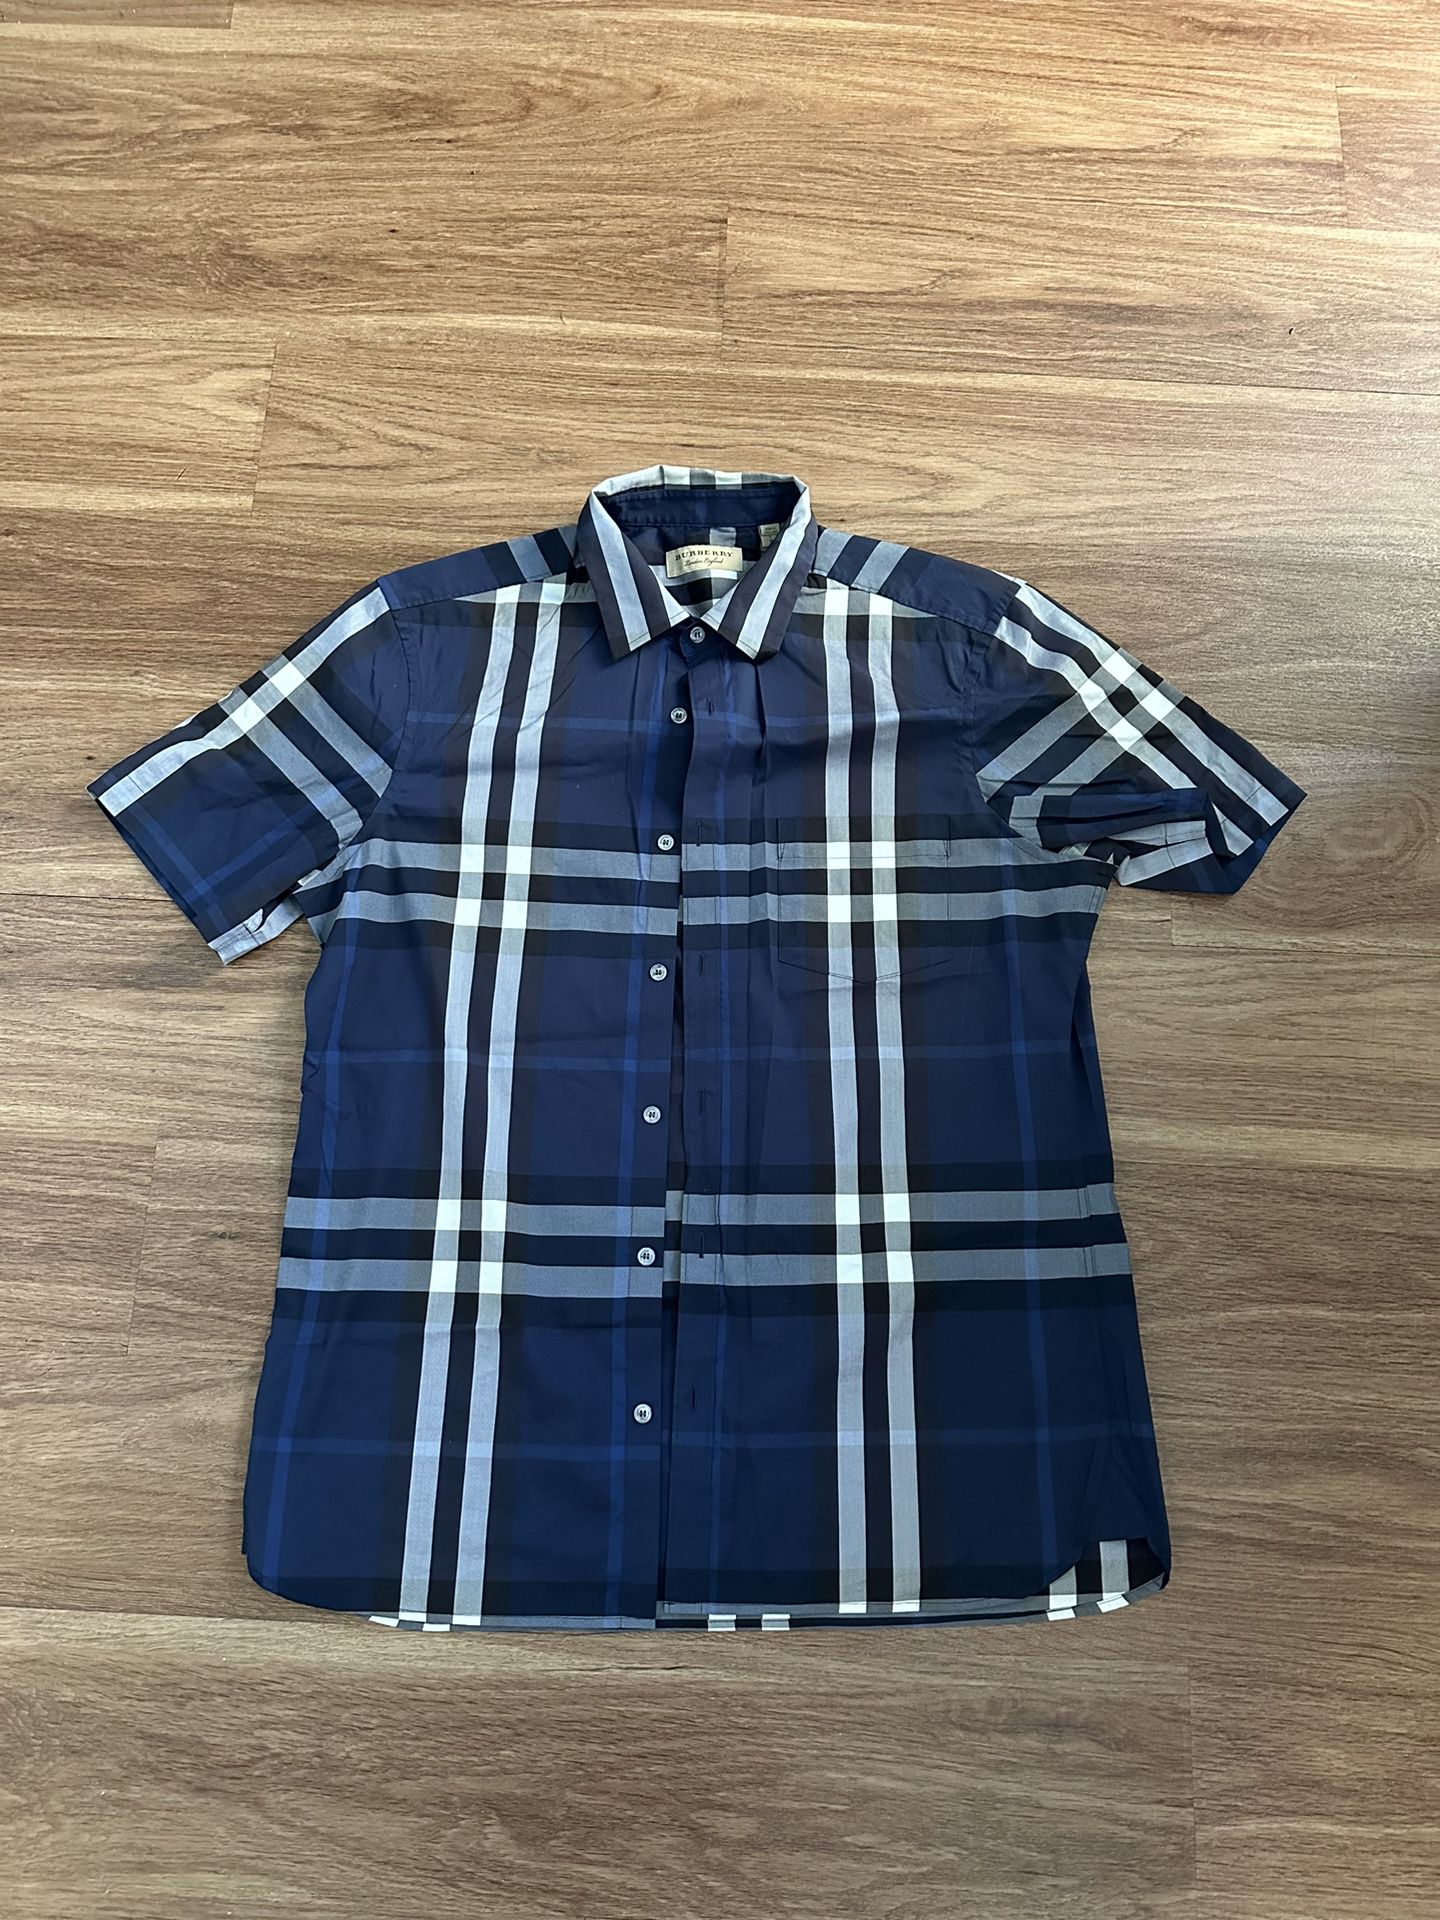 Burberry Button Up Shirt Size Large 